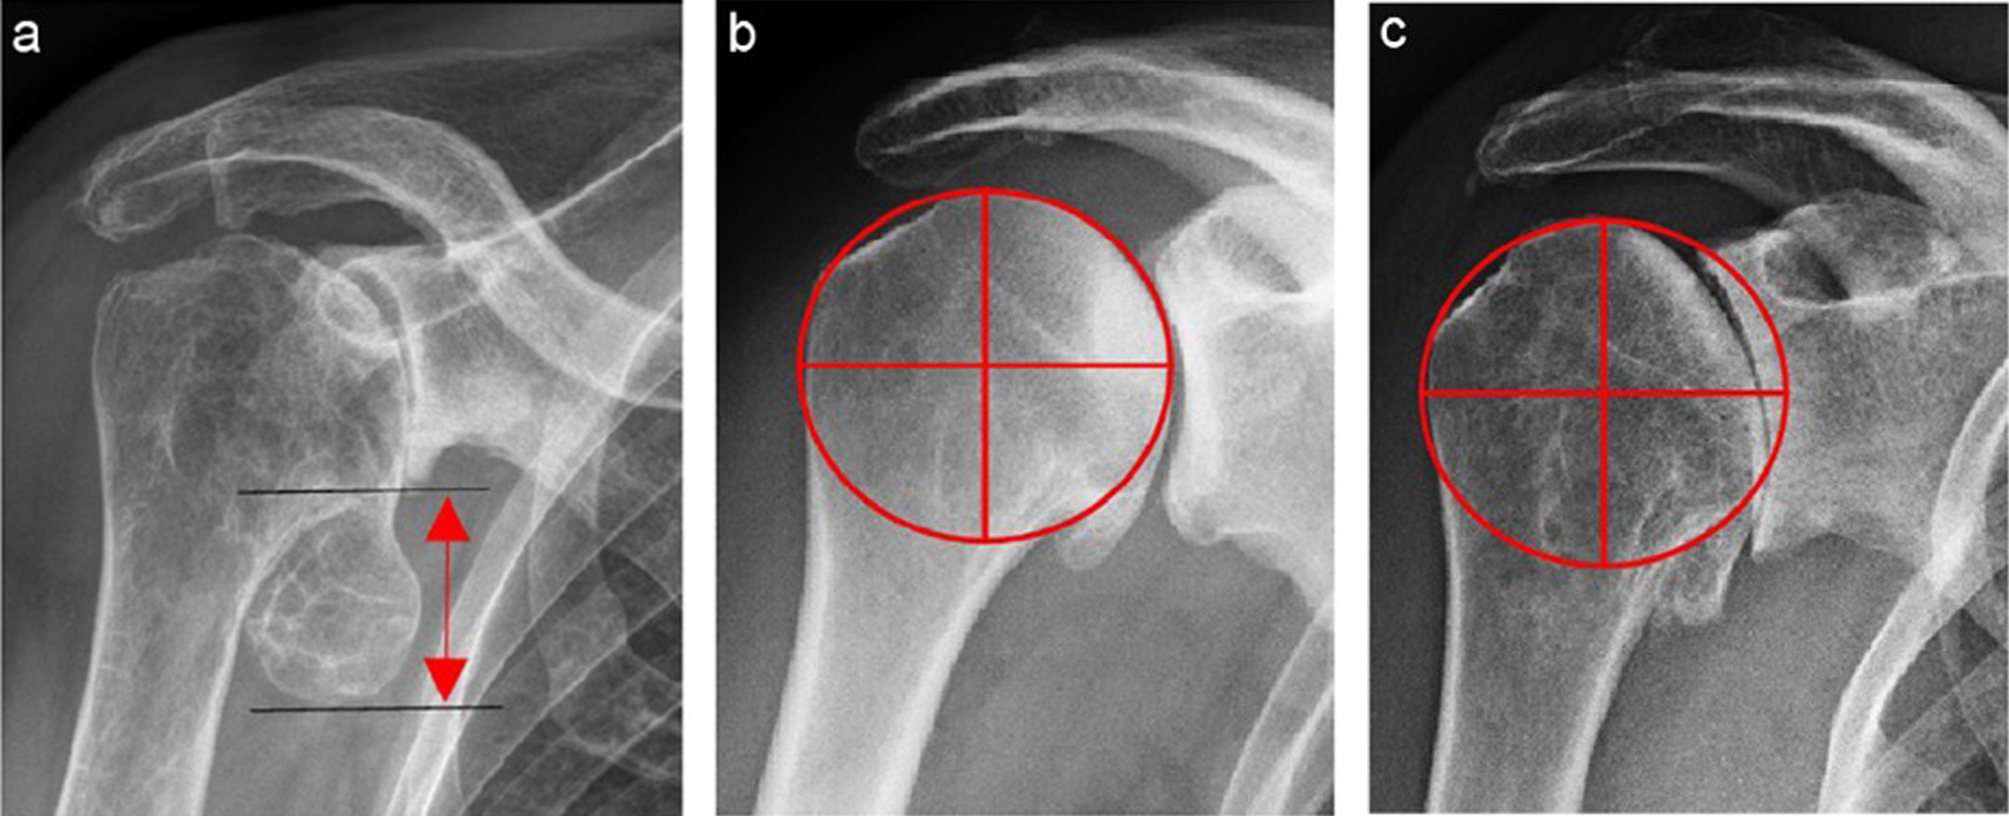 Fig. 1 
          Assessment of the humeral head in anteroposterior radiographs. a) Measuring the humeral osteophyte length in the supero-inferior direction. b) Spherical humeral head shape: A best-fitting circle is congruent with the cortical boundaries of the humeral head. c) Aspherical head shape: There is no congruency between the best-fitting circle and the humeral head cortex.14
        